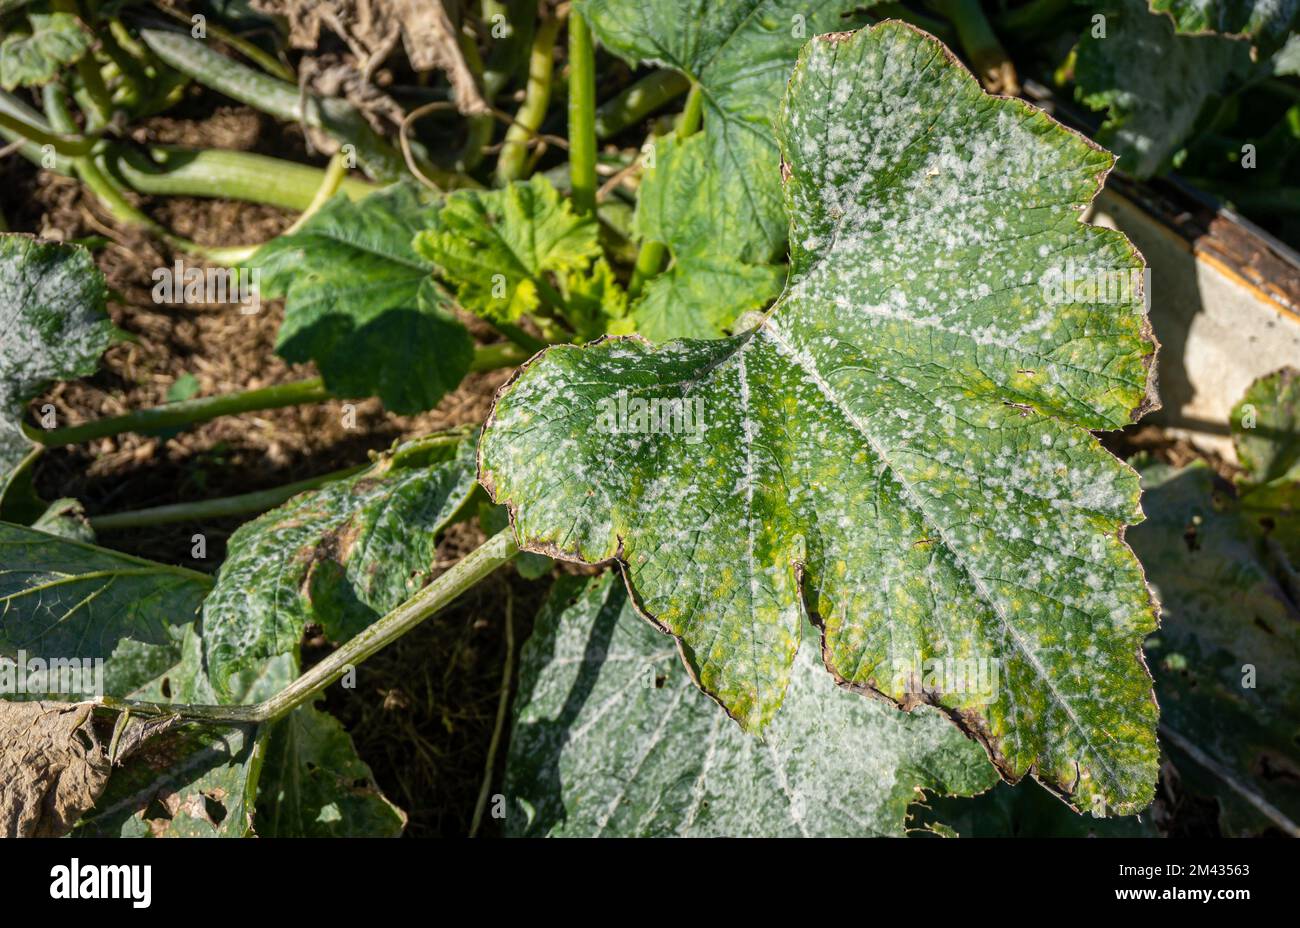 Marrow squash leaf strongly affected by a powdery mildew fungal disease close-up. Stock Photo